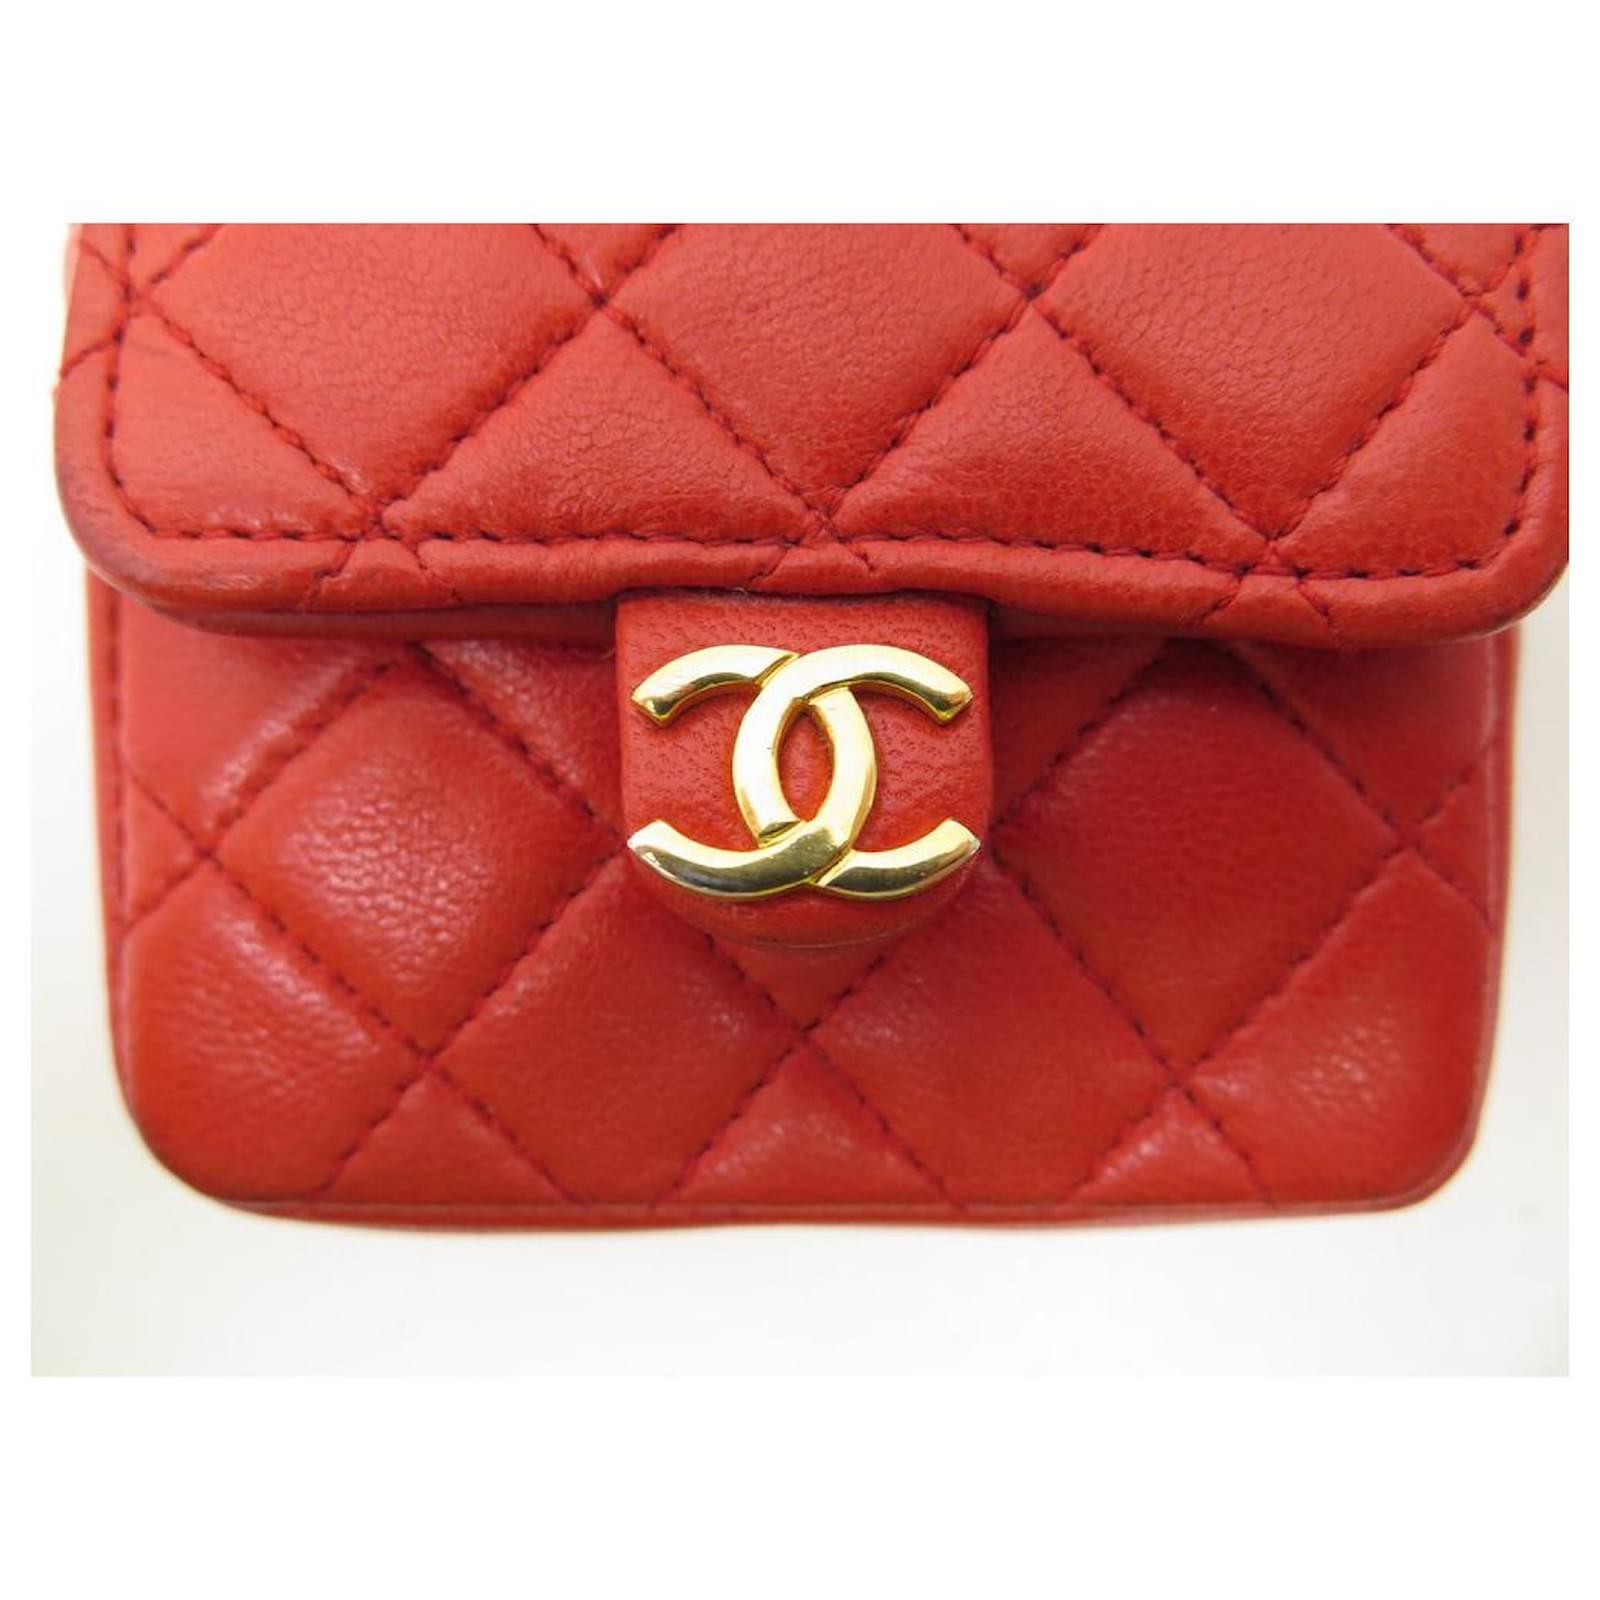 MICRO HANDBAG POUCH BELT CHANEL IN RED LEATHER LEATHER POUCH ref